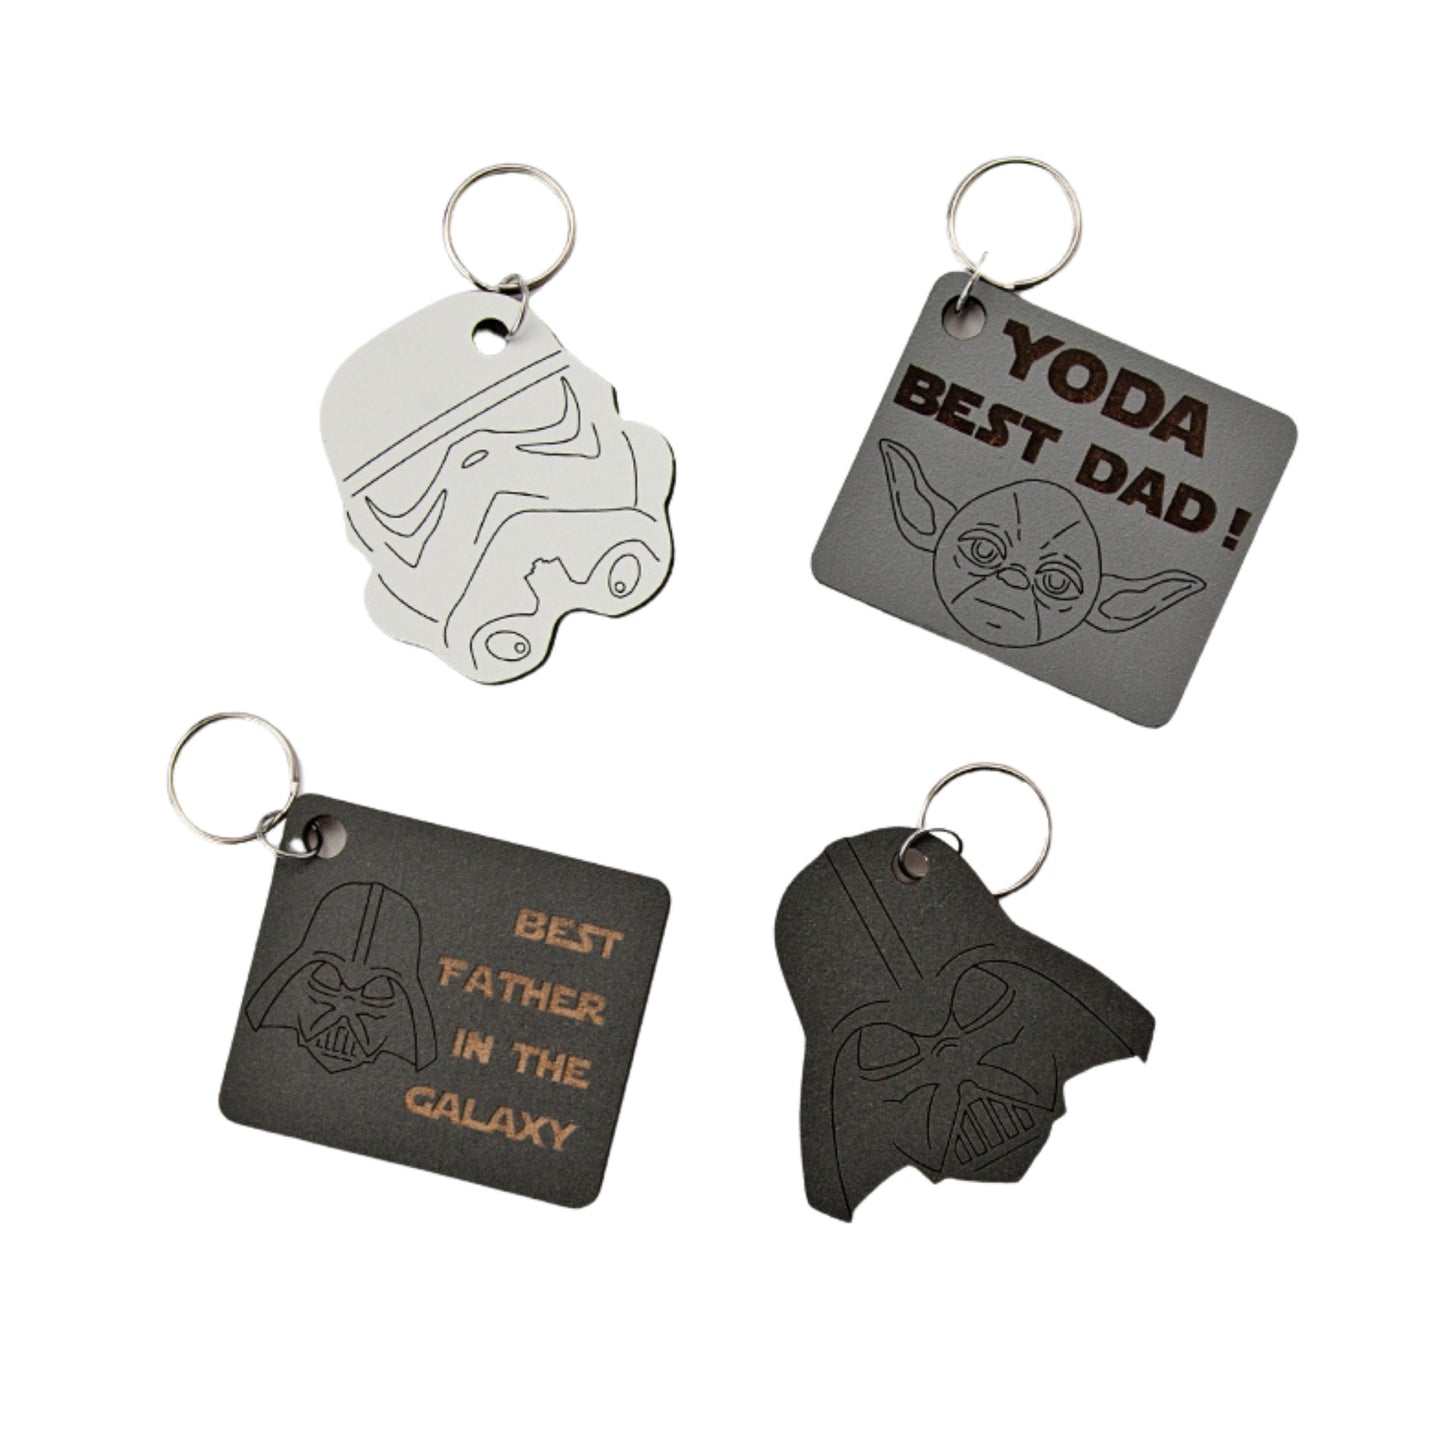 Best Father In The Galaxy Wooden Magnet